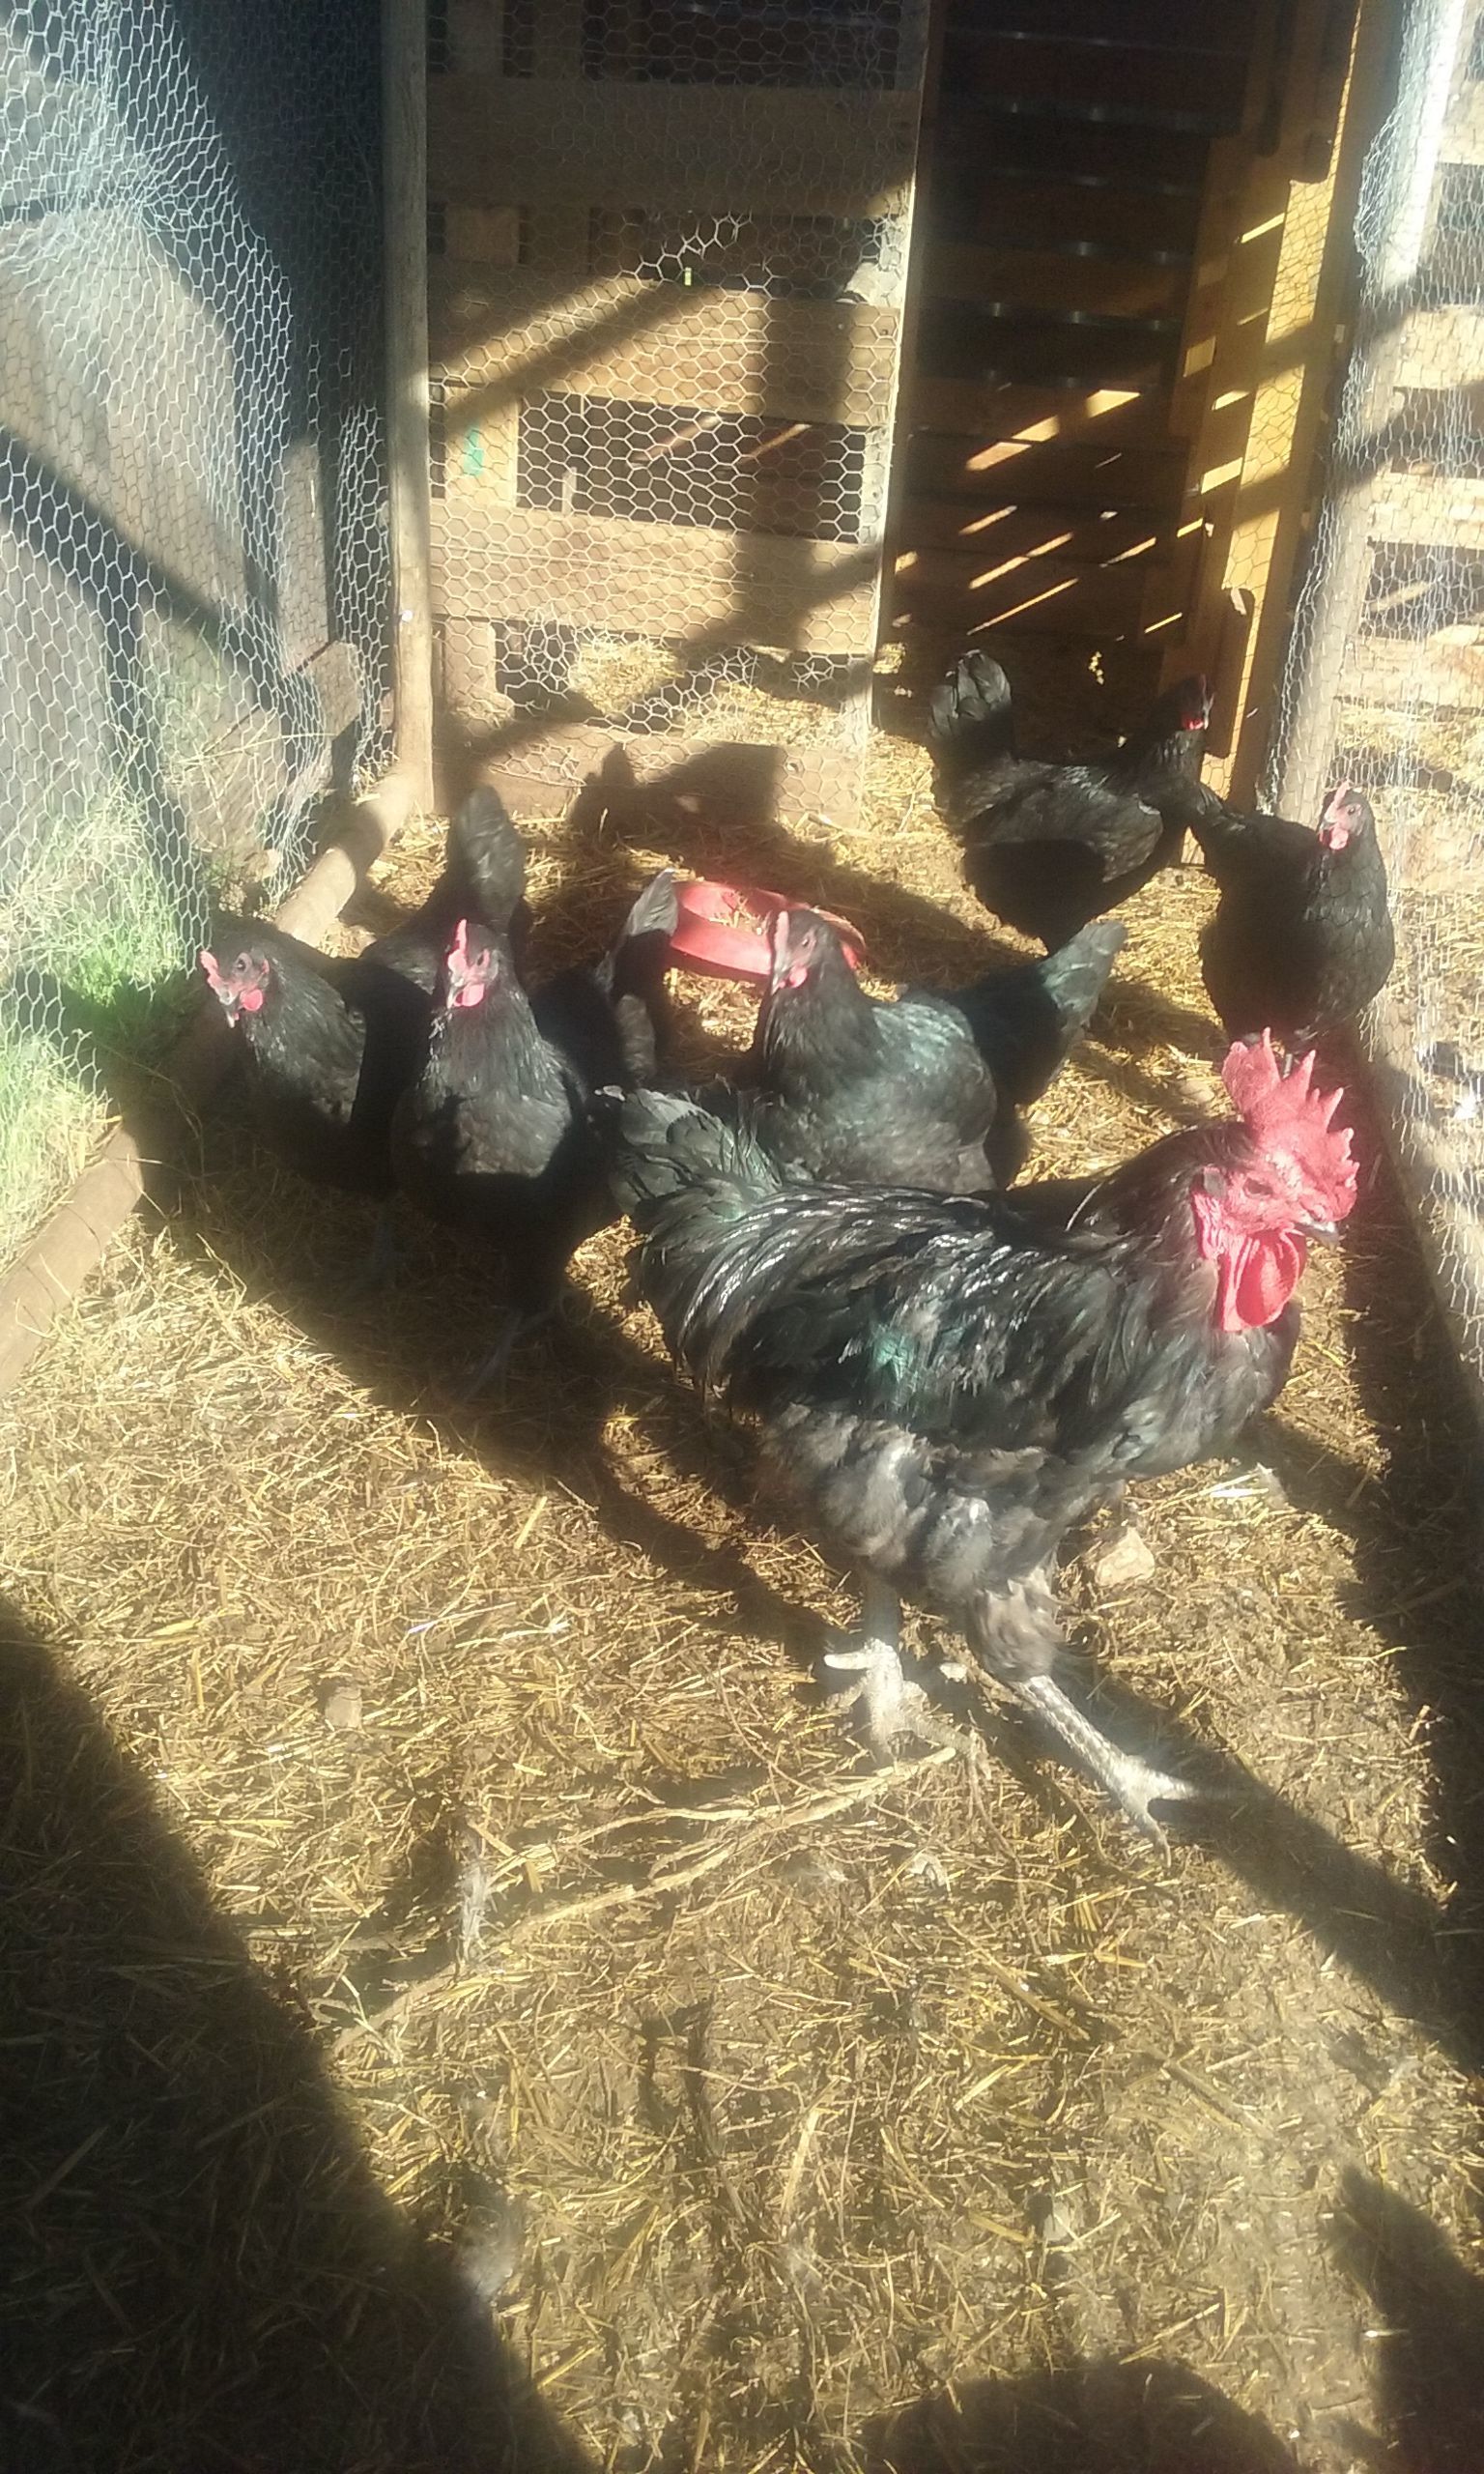 My flock of Black Jersey Giants,
Our Rooster "Loki" and his beautiful hens. 
Loki is going through a horrible molt.